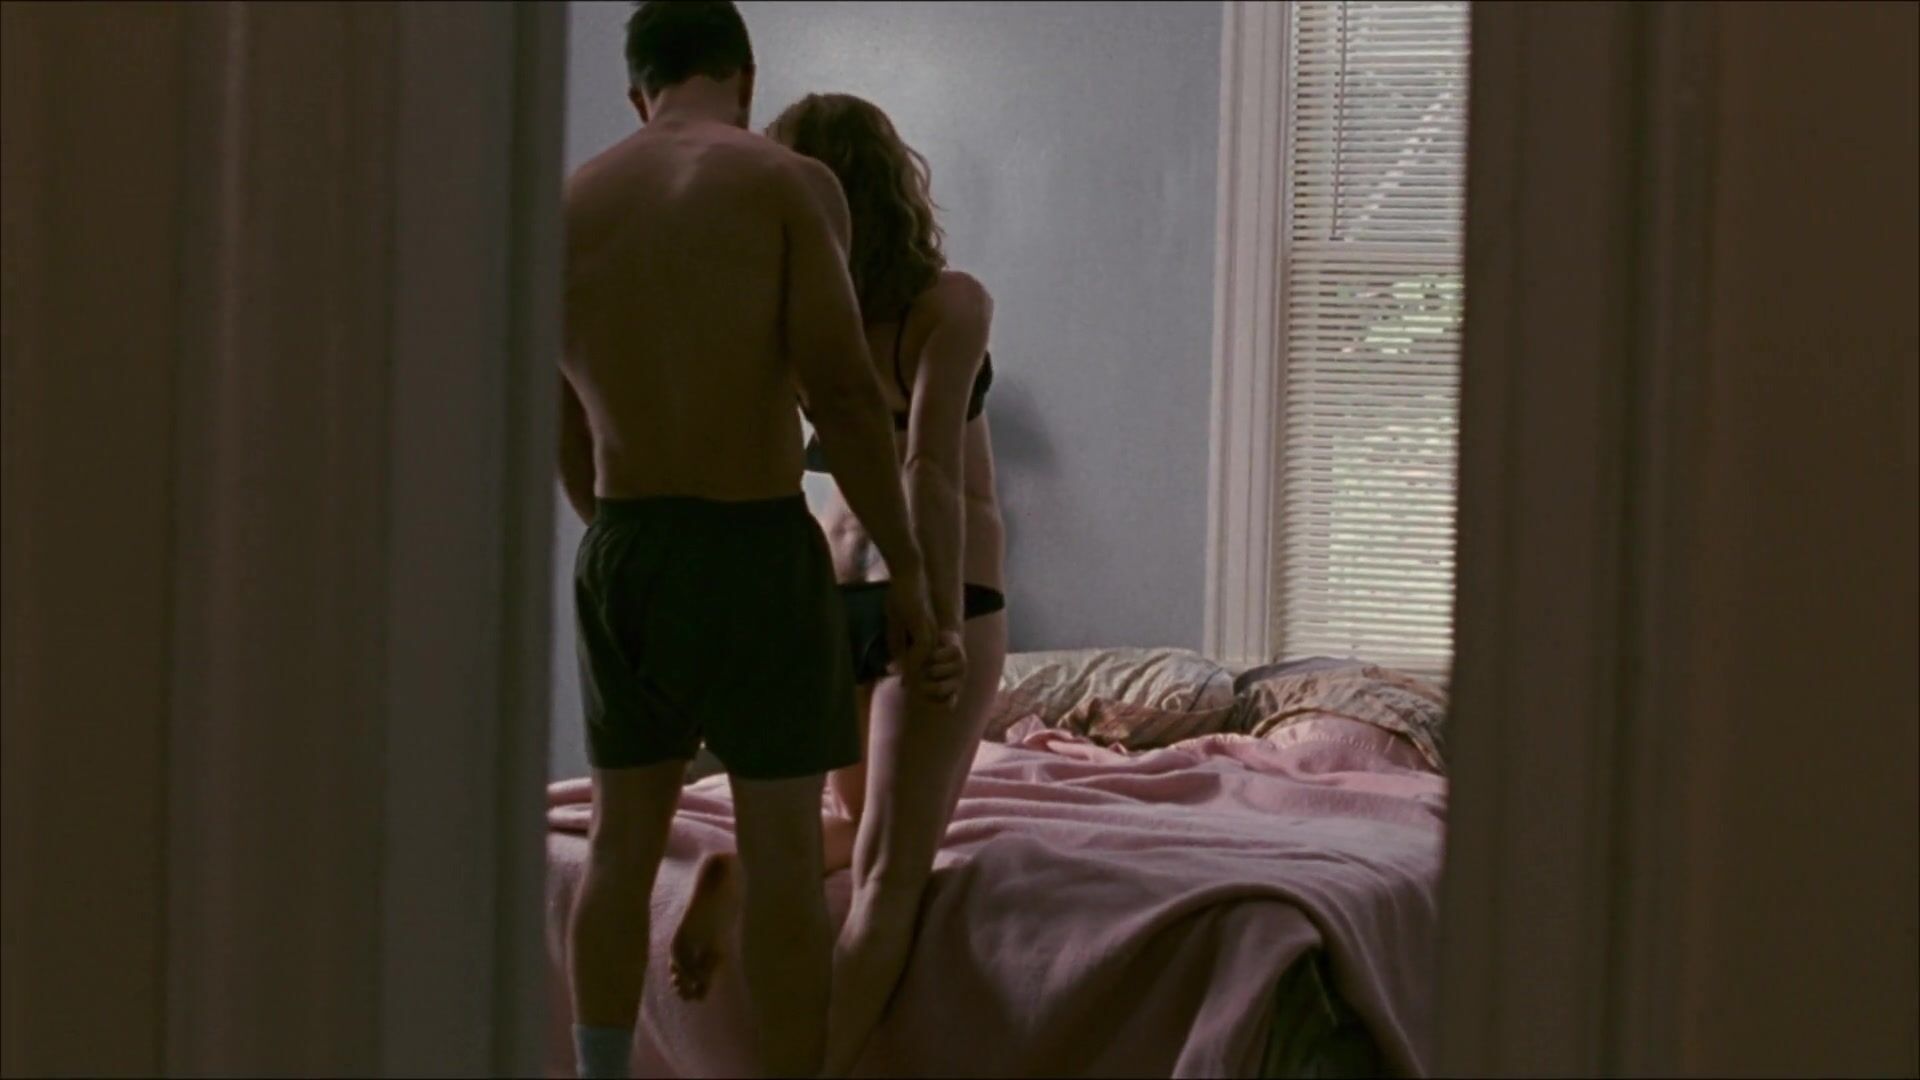 Cheat Man takes Amy Adams to bed but fails to bonk her in nude scene from The Fighter (2010) Chastity - 2